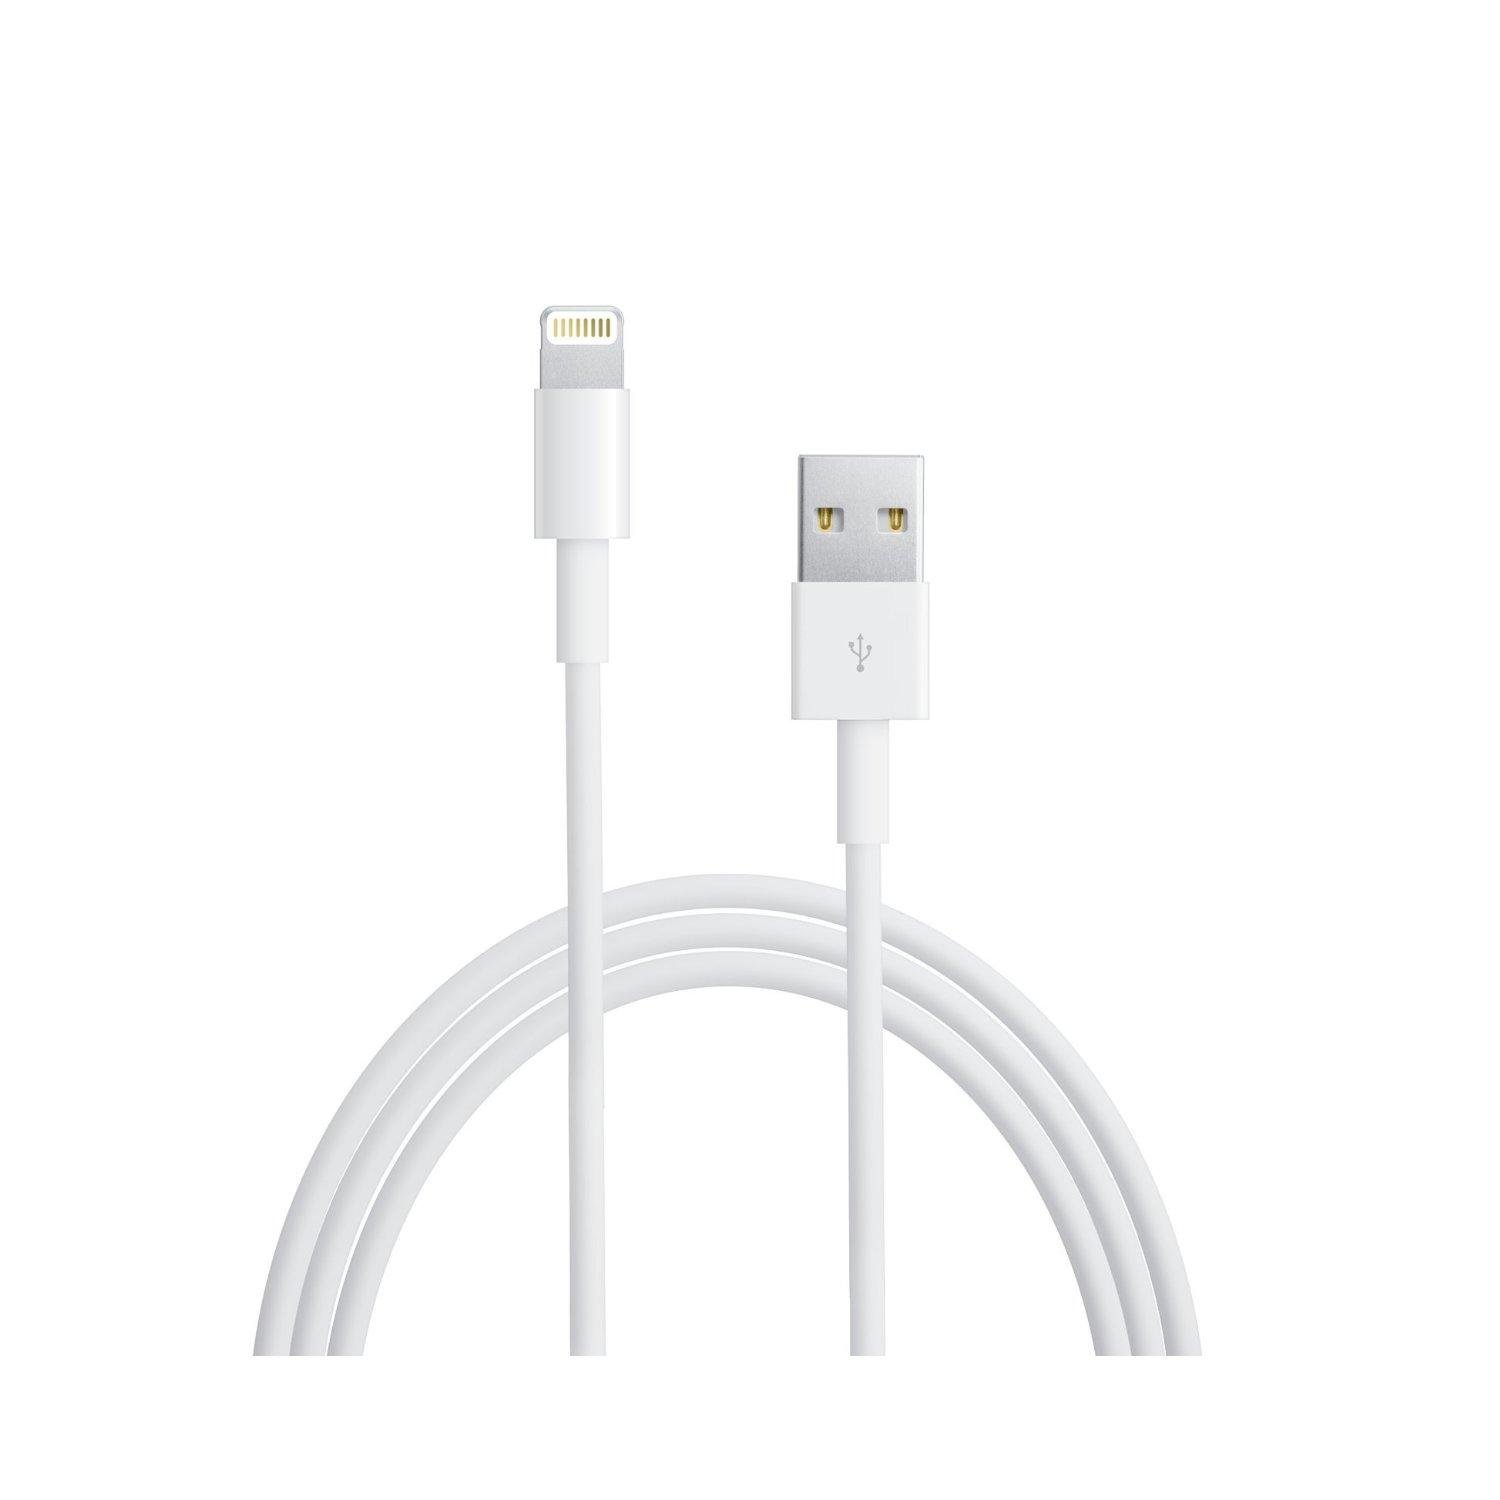 charger and lightning cable iphone